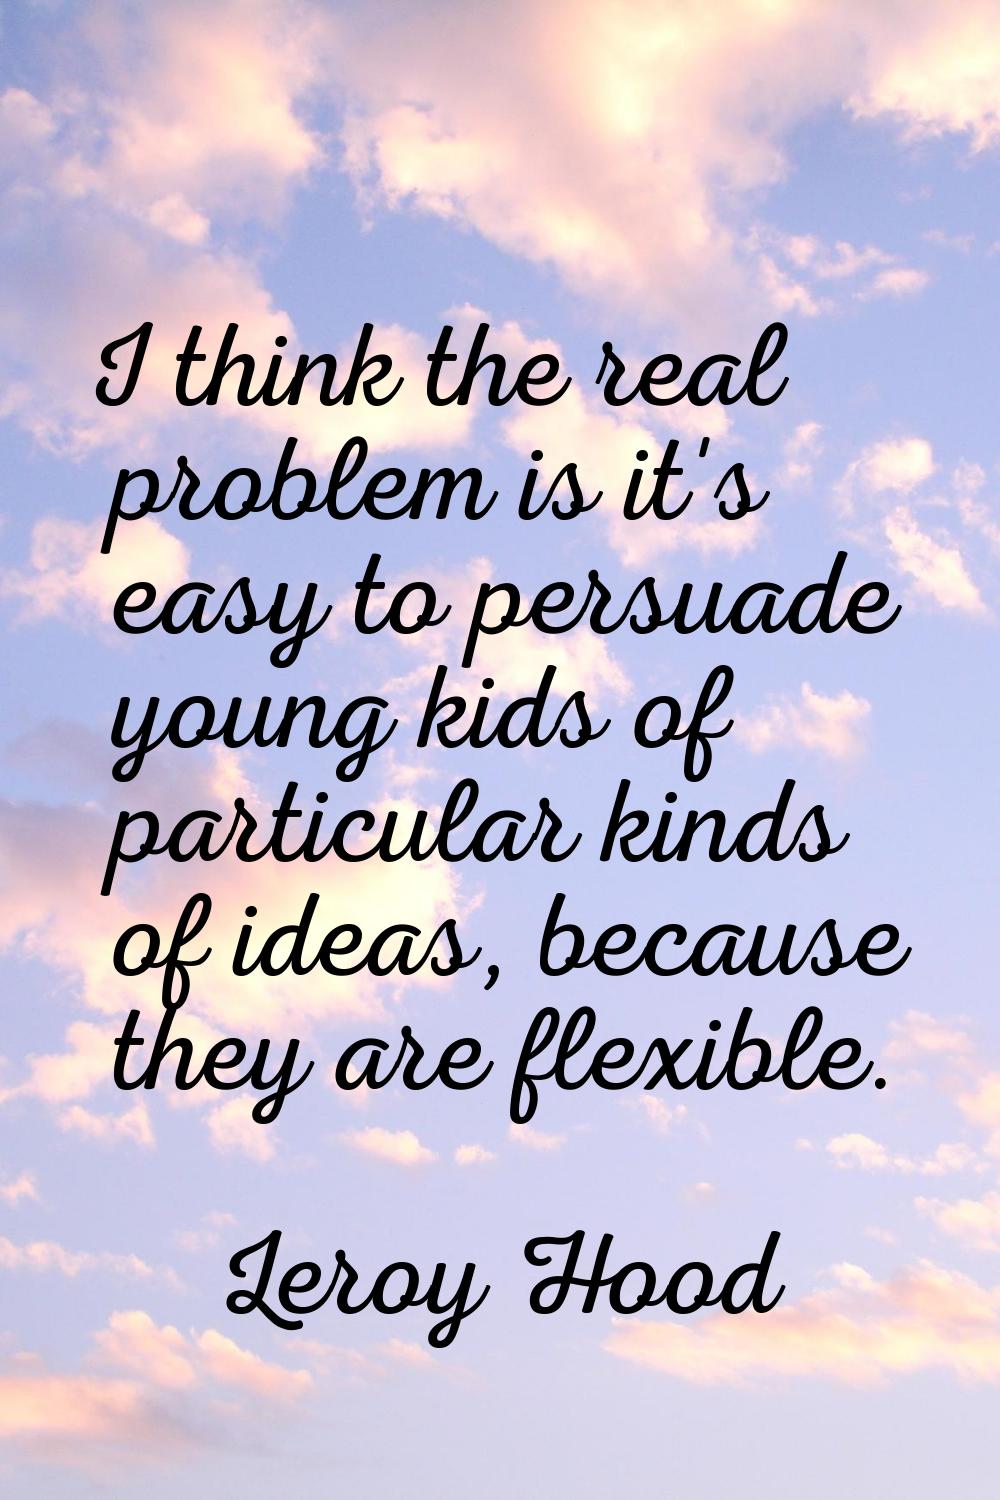 I think the real problem is it's easy to persuade young kids of particular kinds of ideas, because 